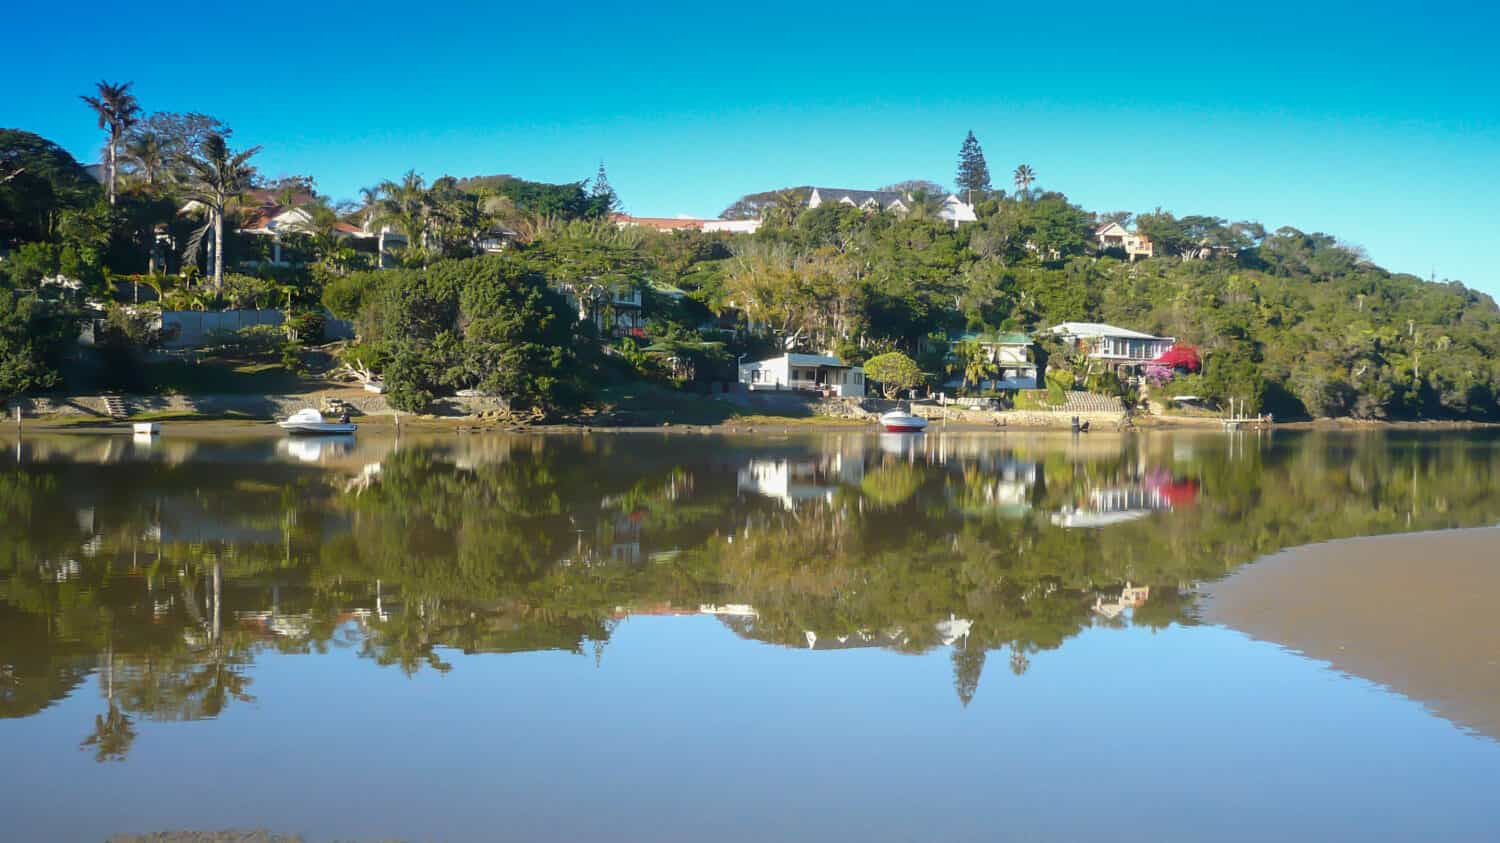 Photo of Gonubie river in East London South Africa